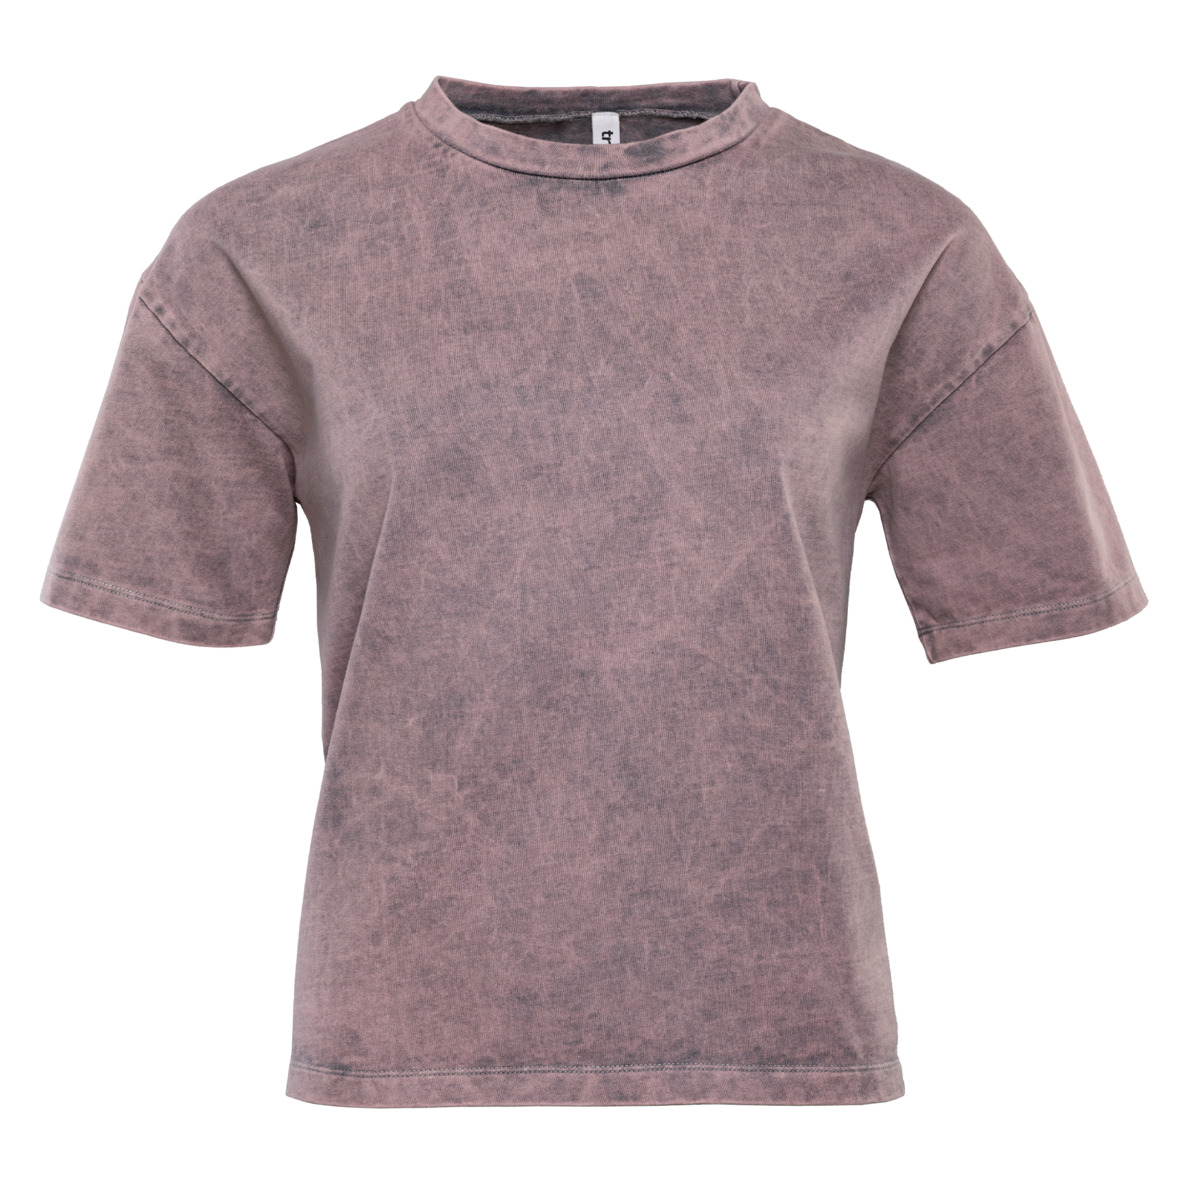 Brown Crafted boxy T-shirt, BENJA